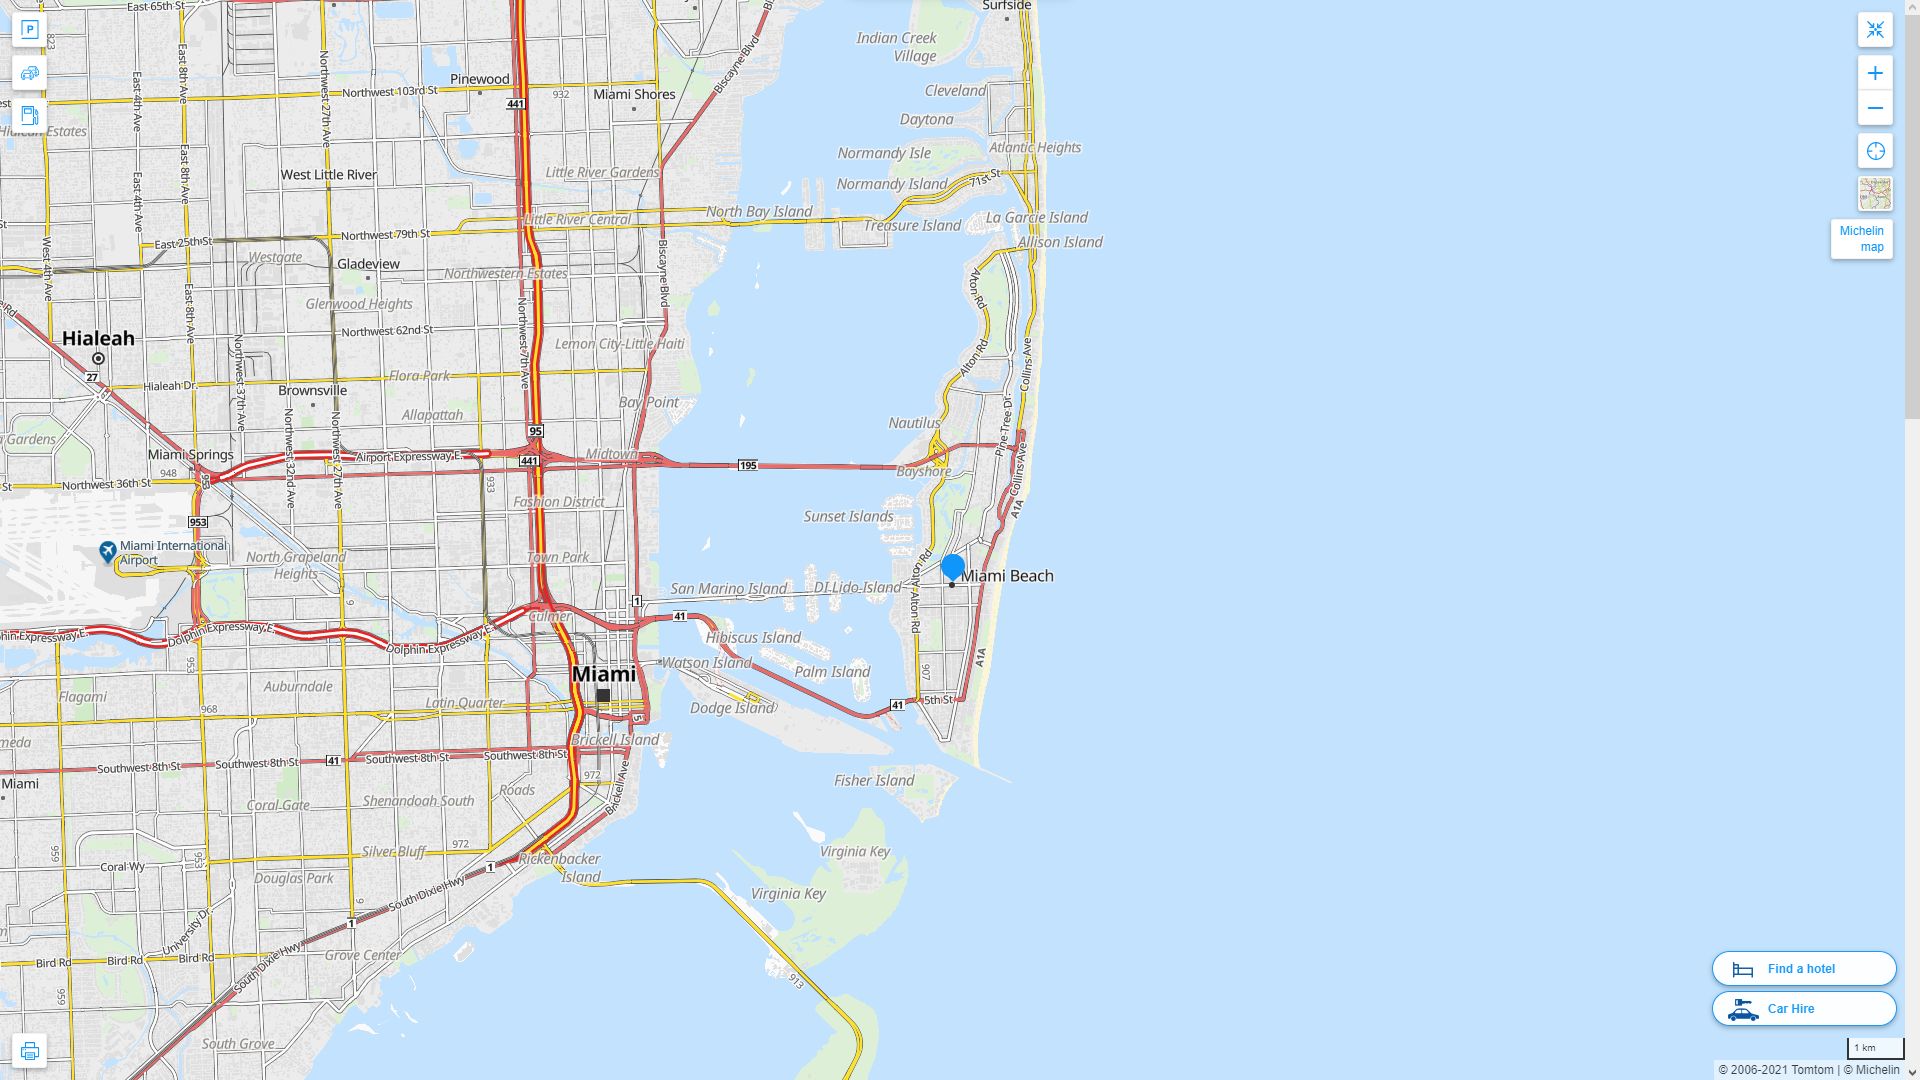 Miami Beach Florida Highway and Road Map